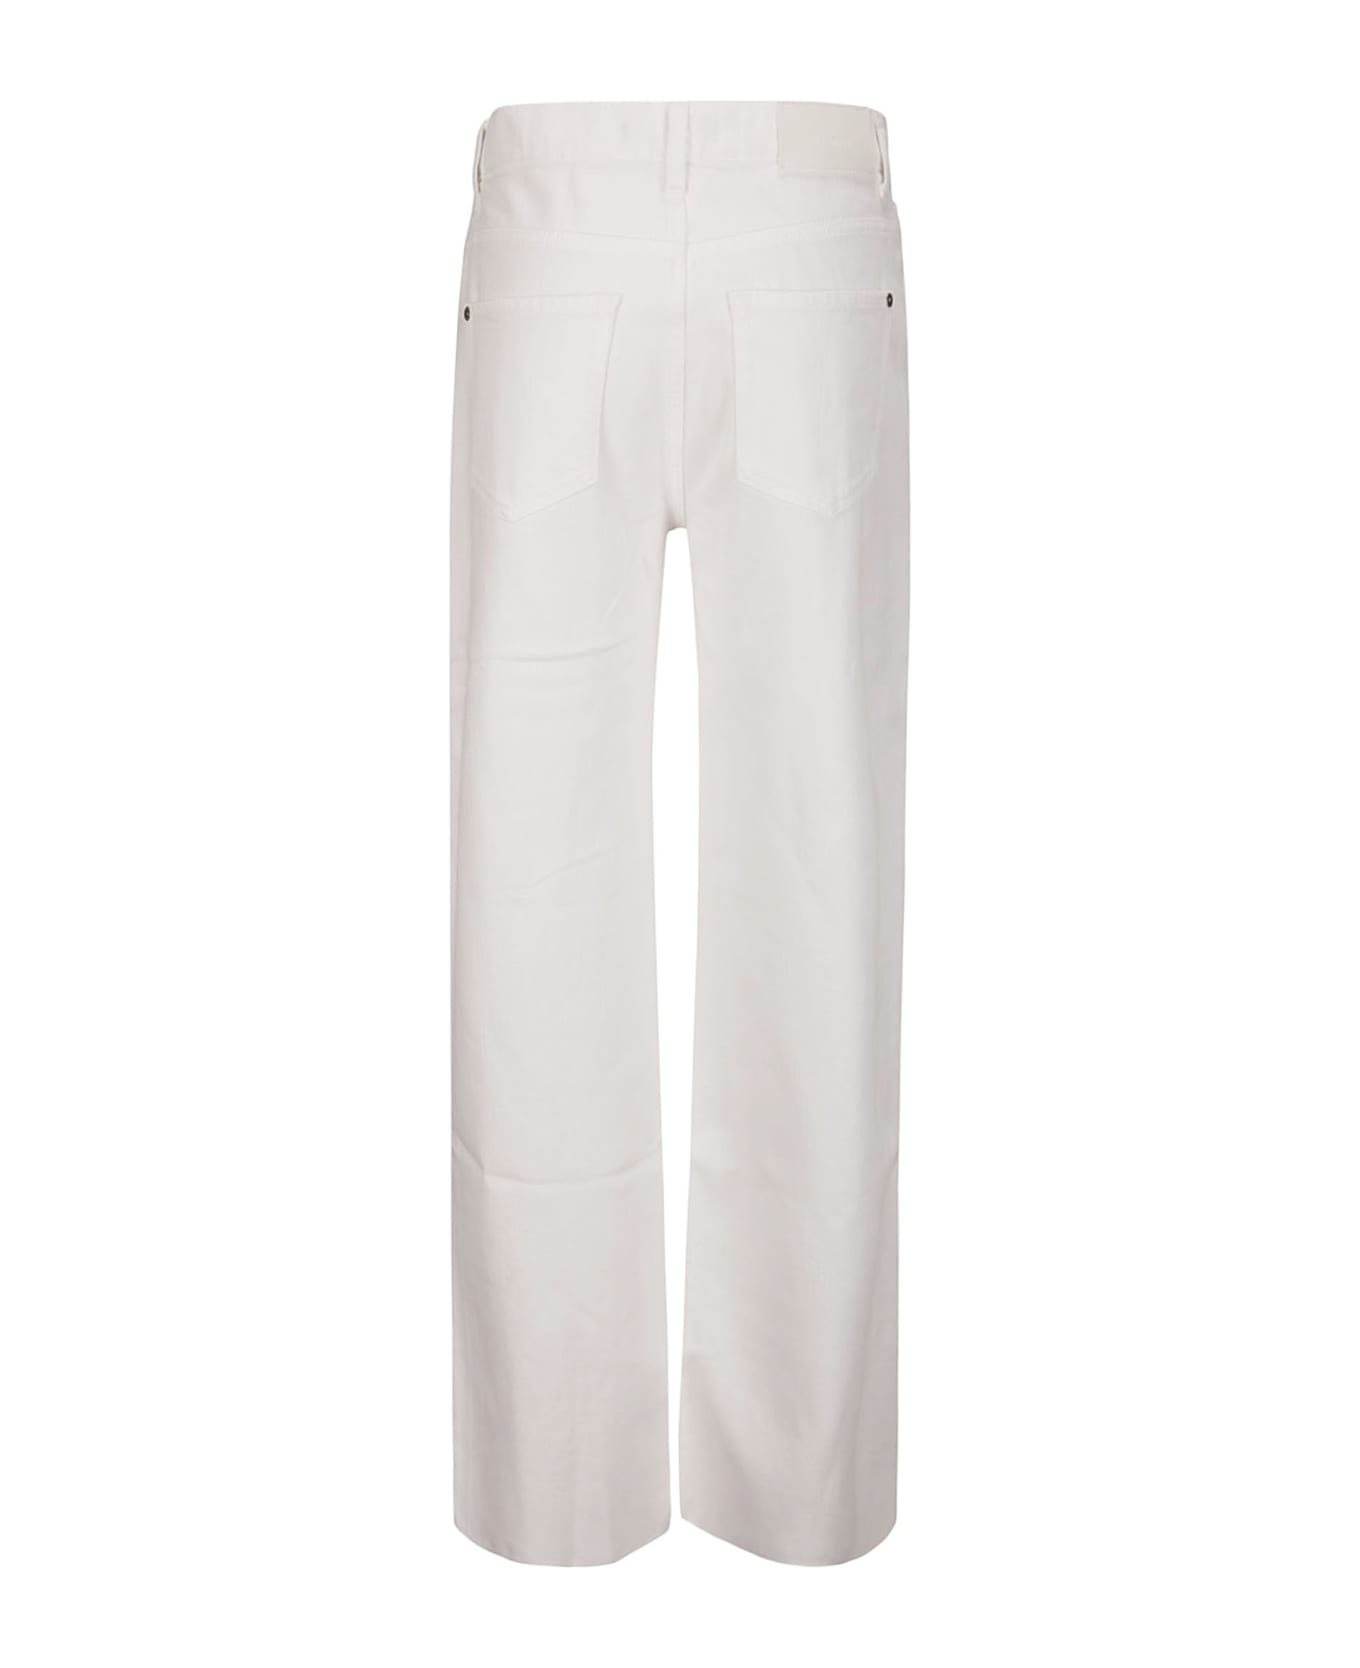 7 For All Mankind Scout Snow White With Raw Cut - WHITE